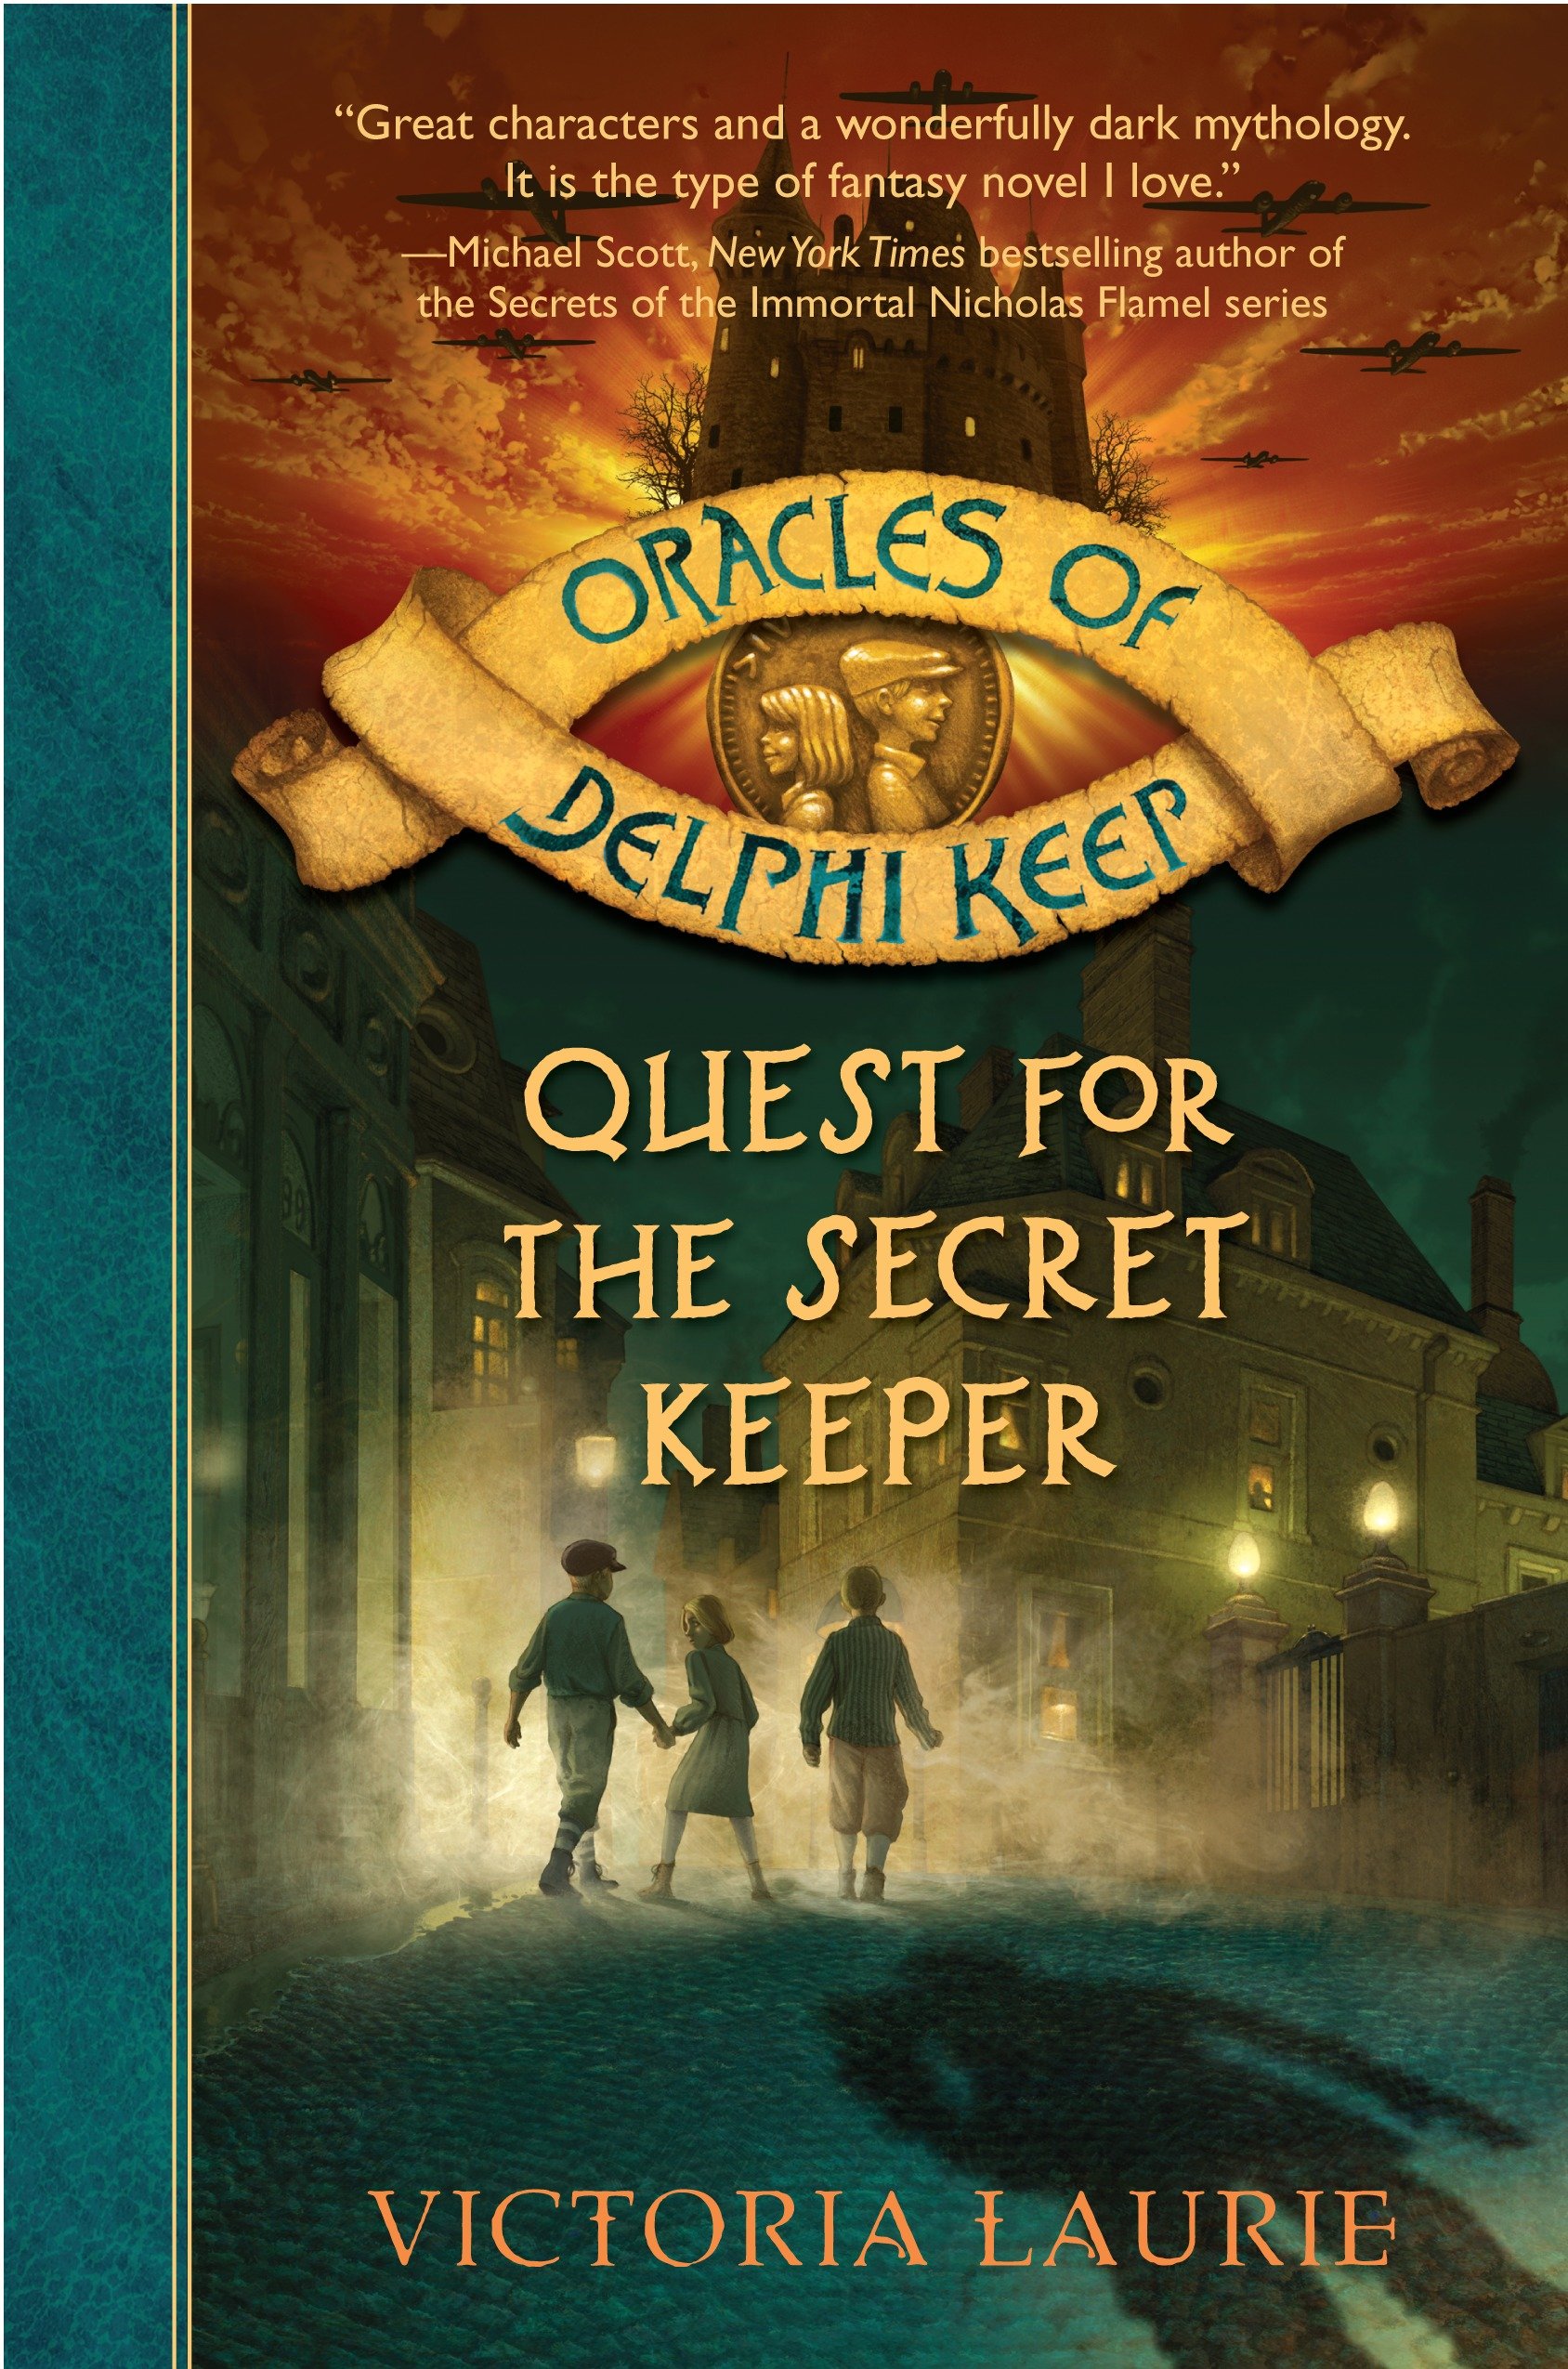 Quest for the secret keeper cover image